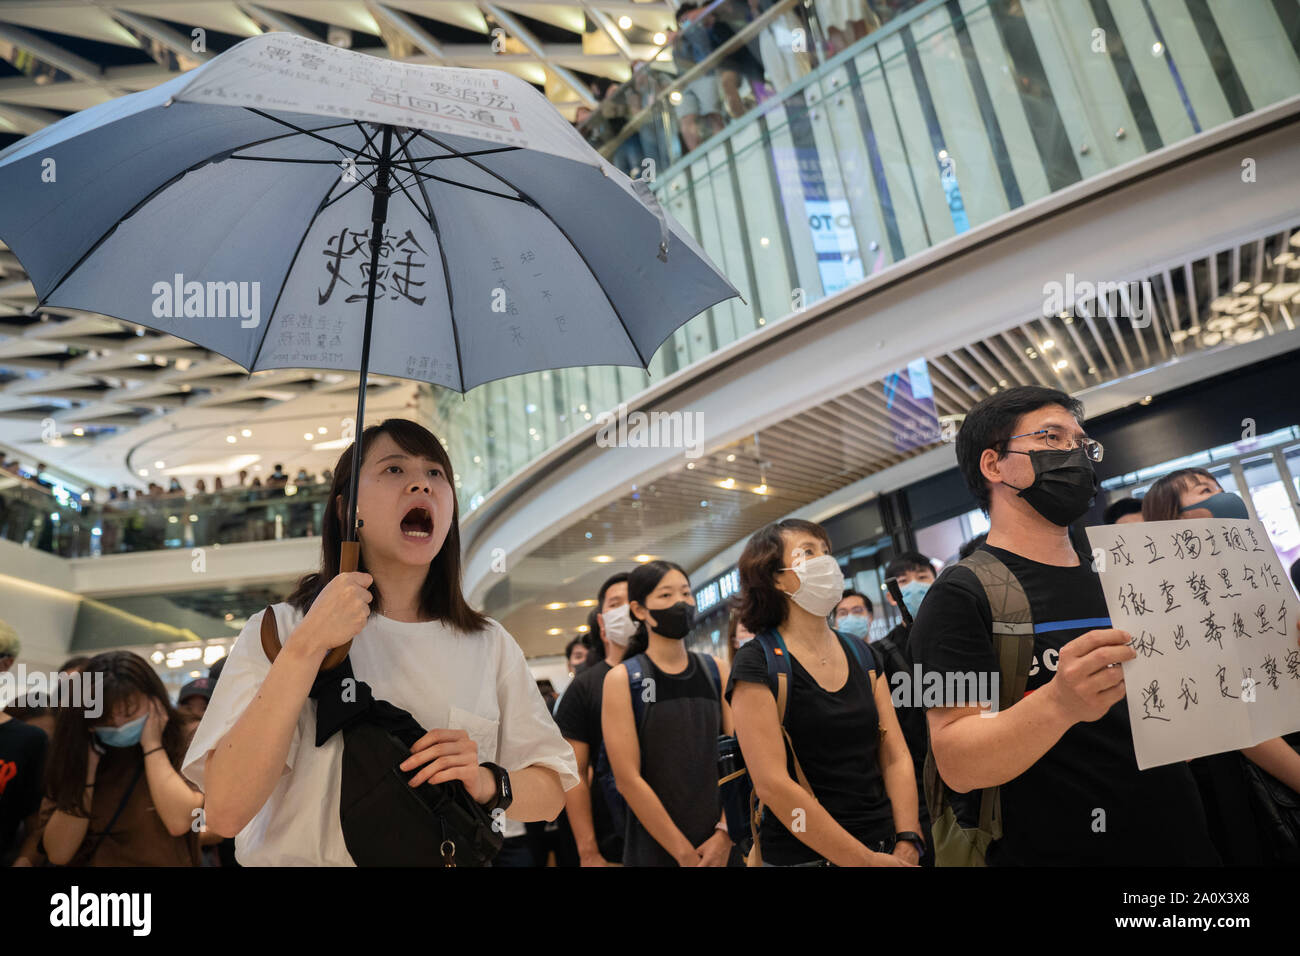 Pro-democracy protesters sing songs and shout slogans as they gather in a shopping mall during a rally in Yeun Long. Pro-democracy protesters have continued demonstrations across Hong Kong, calling for the city's Chief Executive Carrie Lam to immediately meet the rest of their demands, including an independent inquiry into police brutality, the retraction of the word “riot” to describe the rallies, and genuine universal suffrage, as the territory faces a leadership crisis. Stock Photo